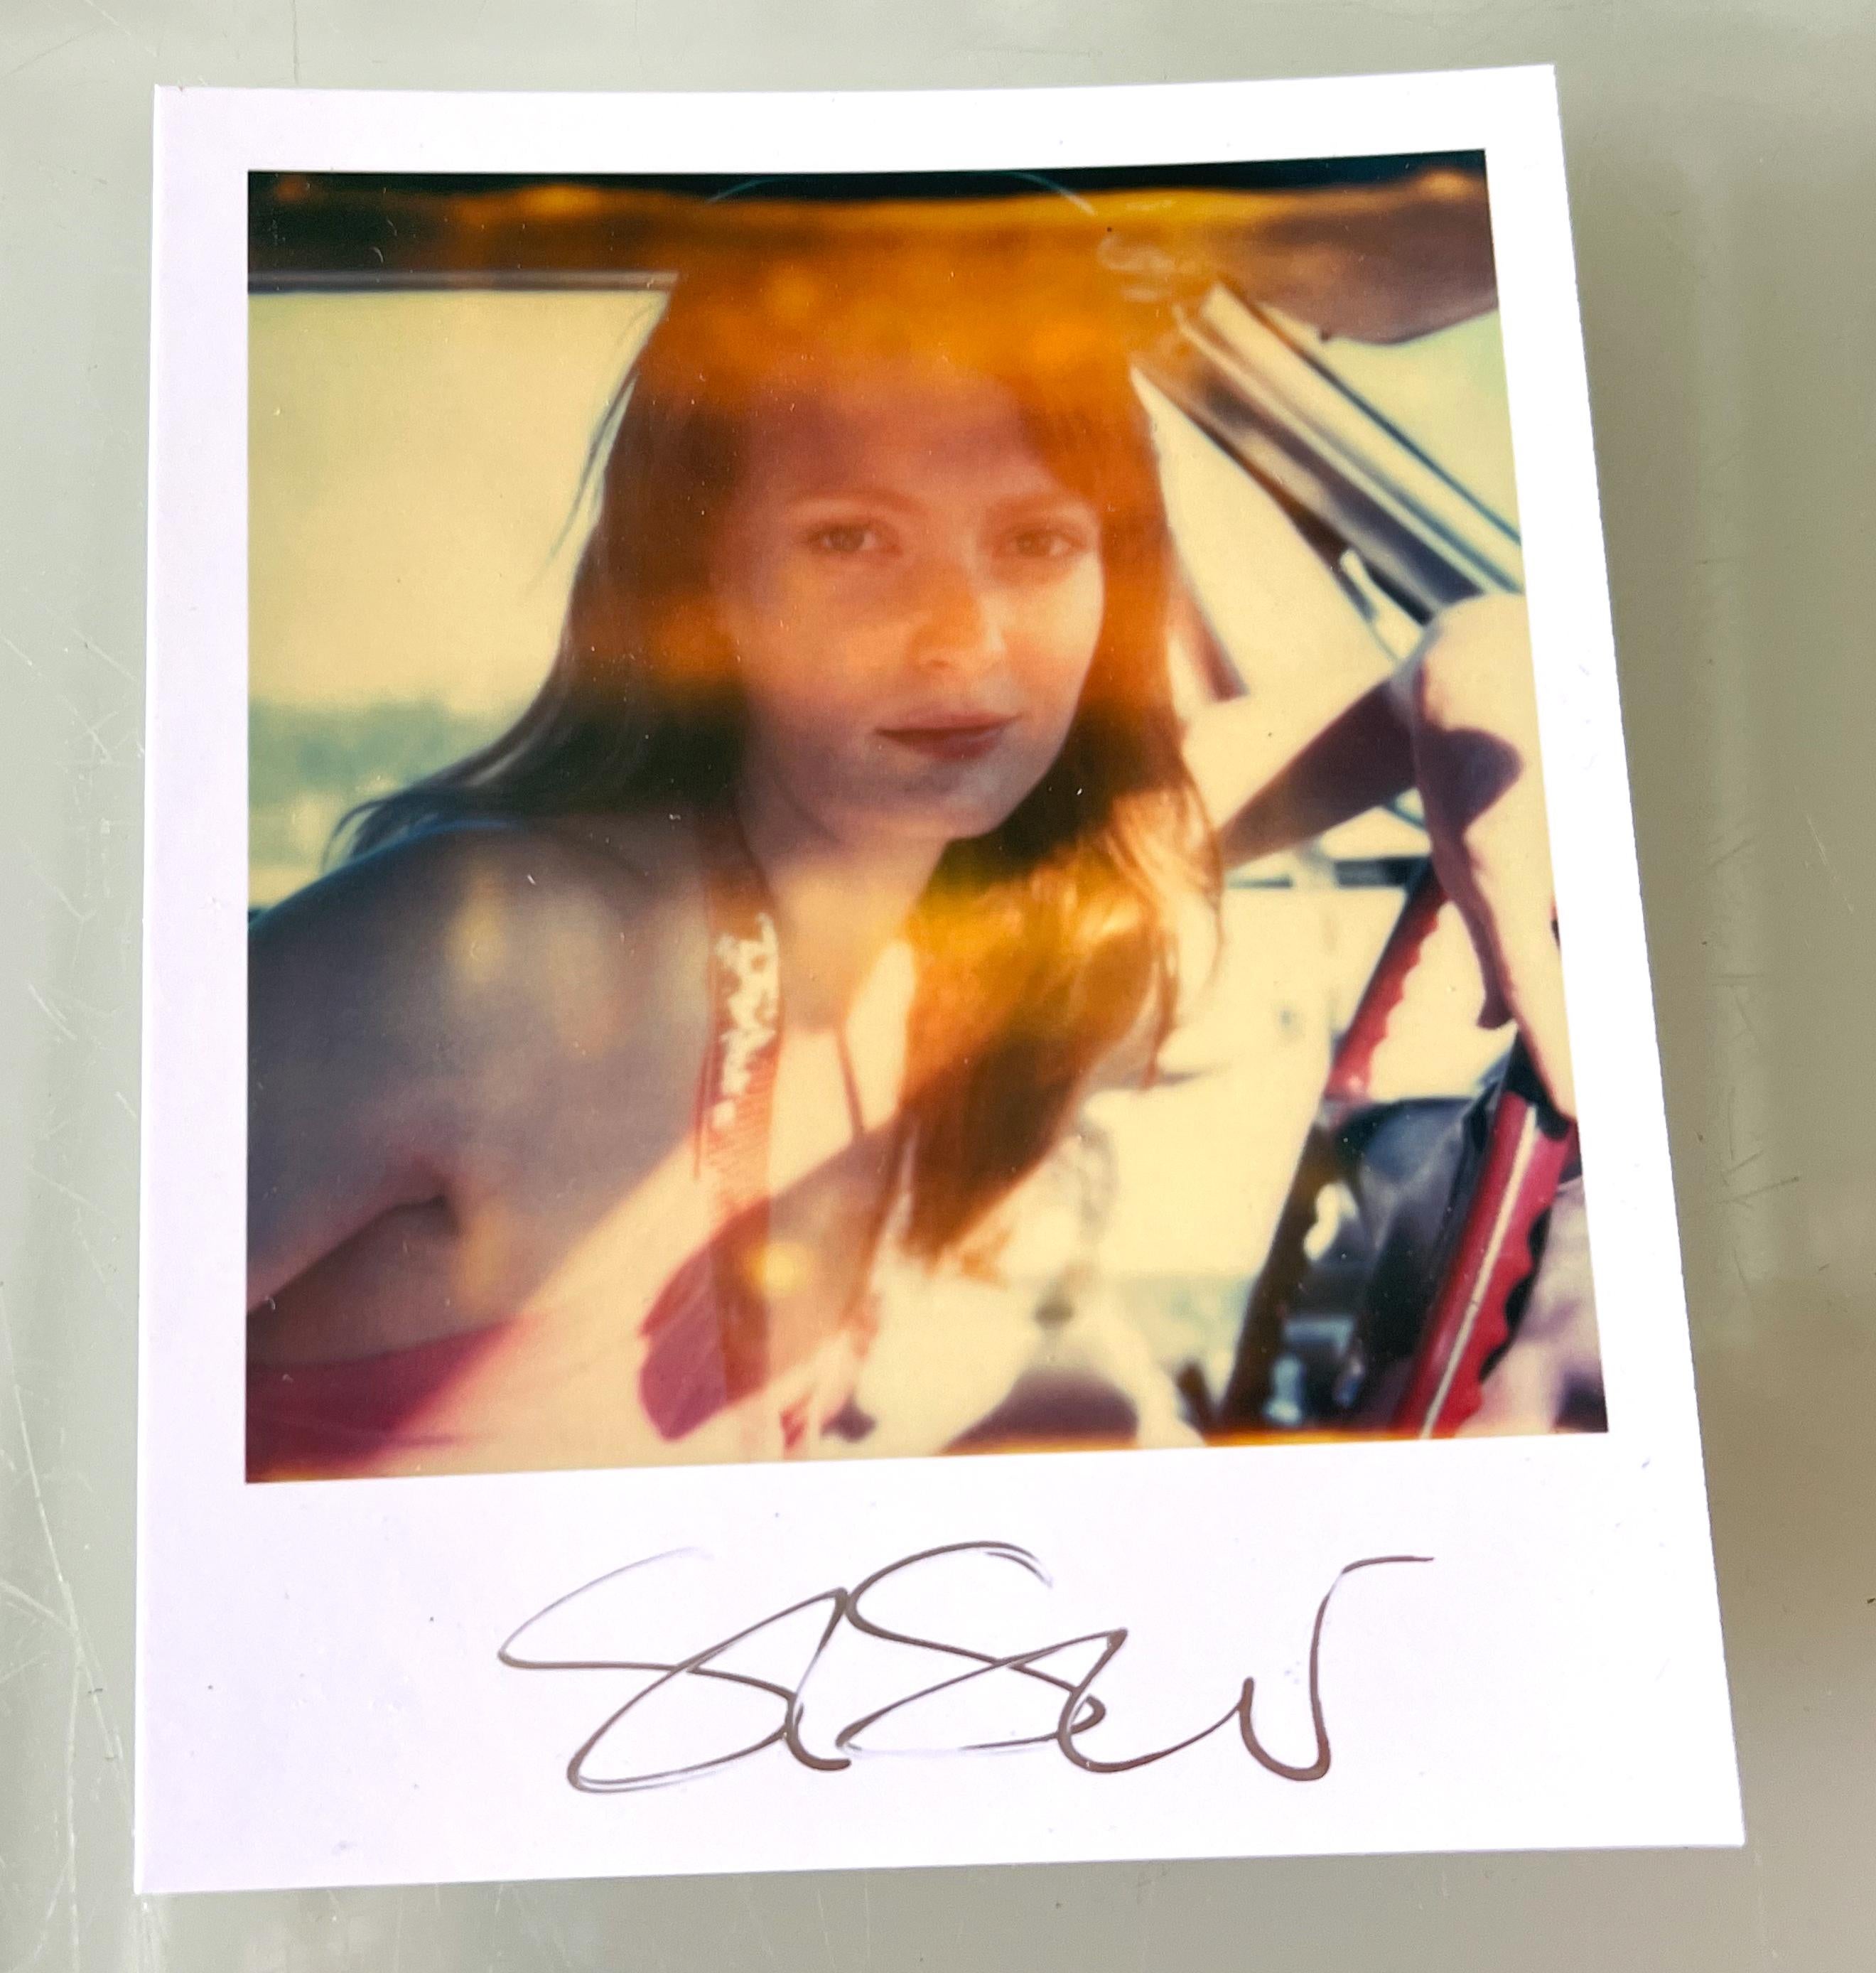 Stefanie Schneider's Mini
Her Eyes, the Color of the Sky (Till Death Do Us Part) - 2005
featuring Daisy McCrackin

signed in front, not mounted. 
Digital Color Photographs based on a Polaroid. 

Polaroid sized open Editions 1999-2013
10.7 x 8.8cm